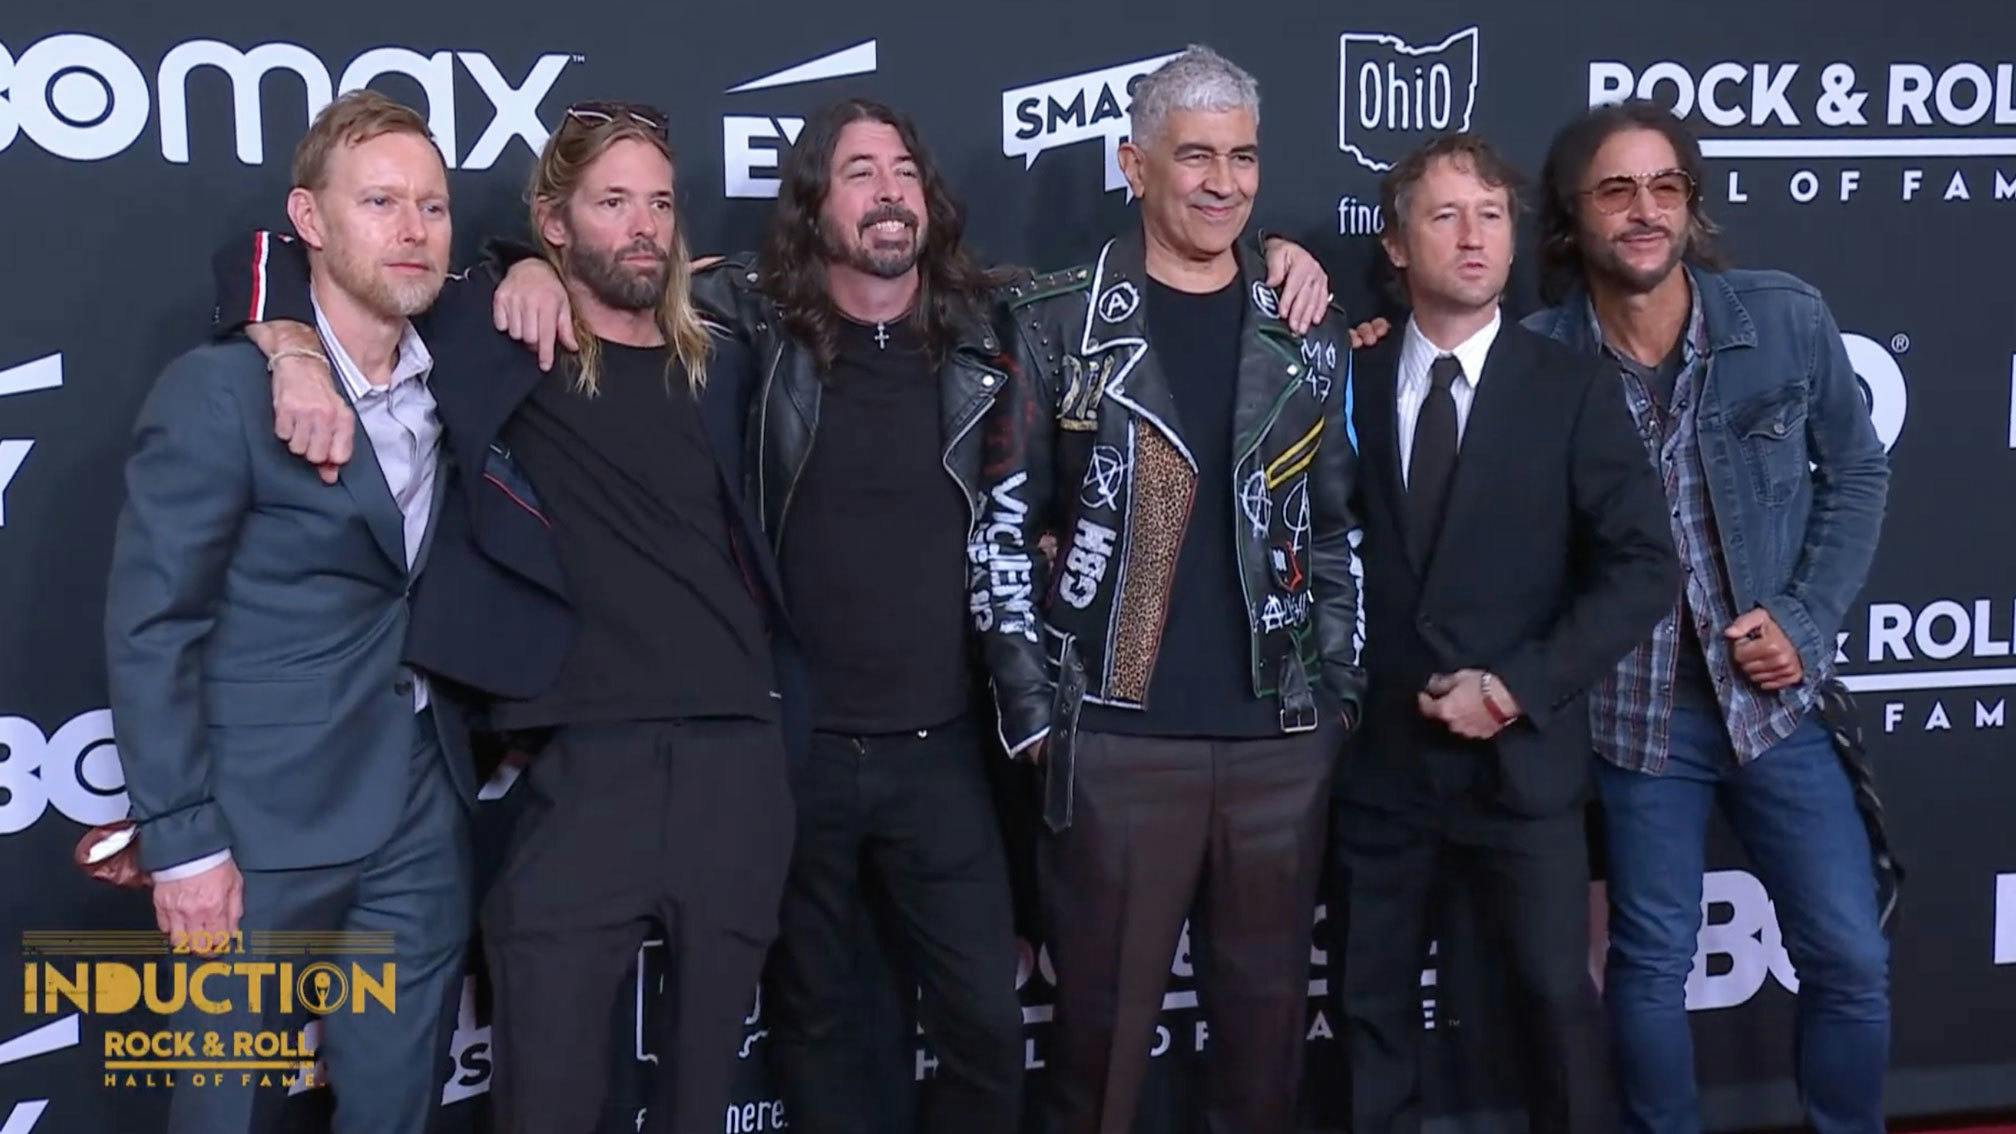 Paul McCartney inducts Foo Fighters into the Rock & Roll Hall Of Fame